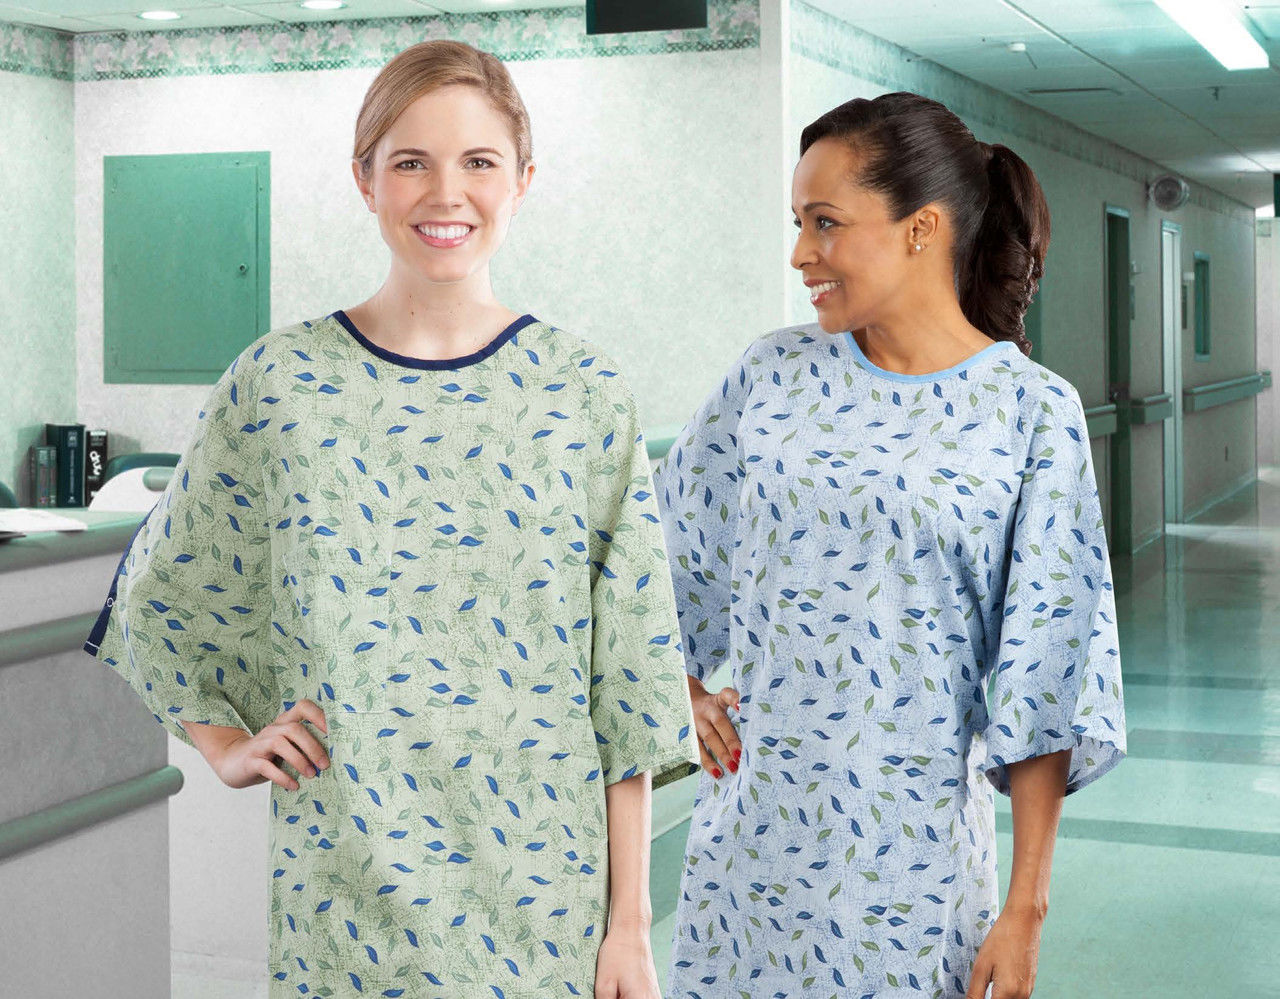 Are there various designs for the polyester patient gowns from American Dawn?